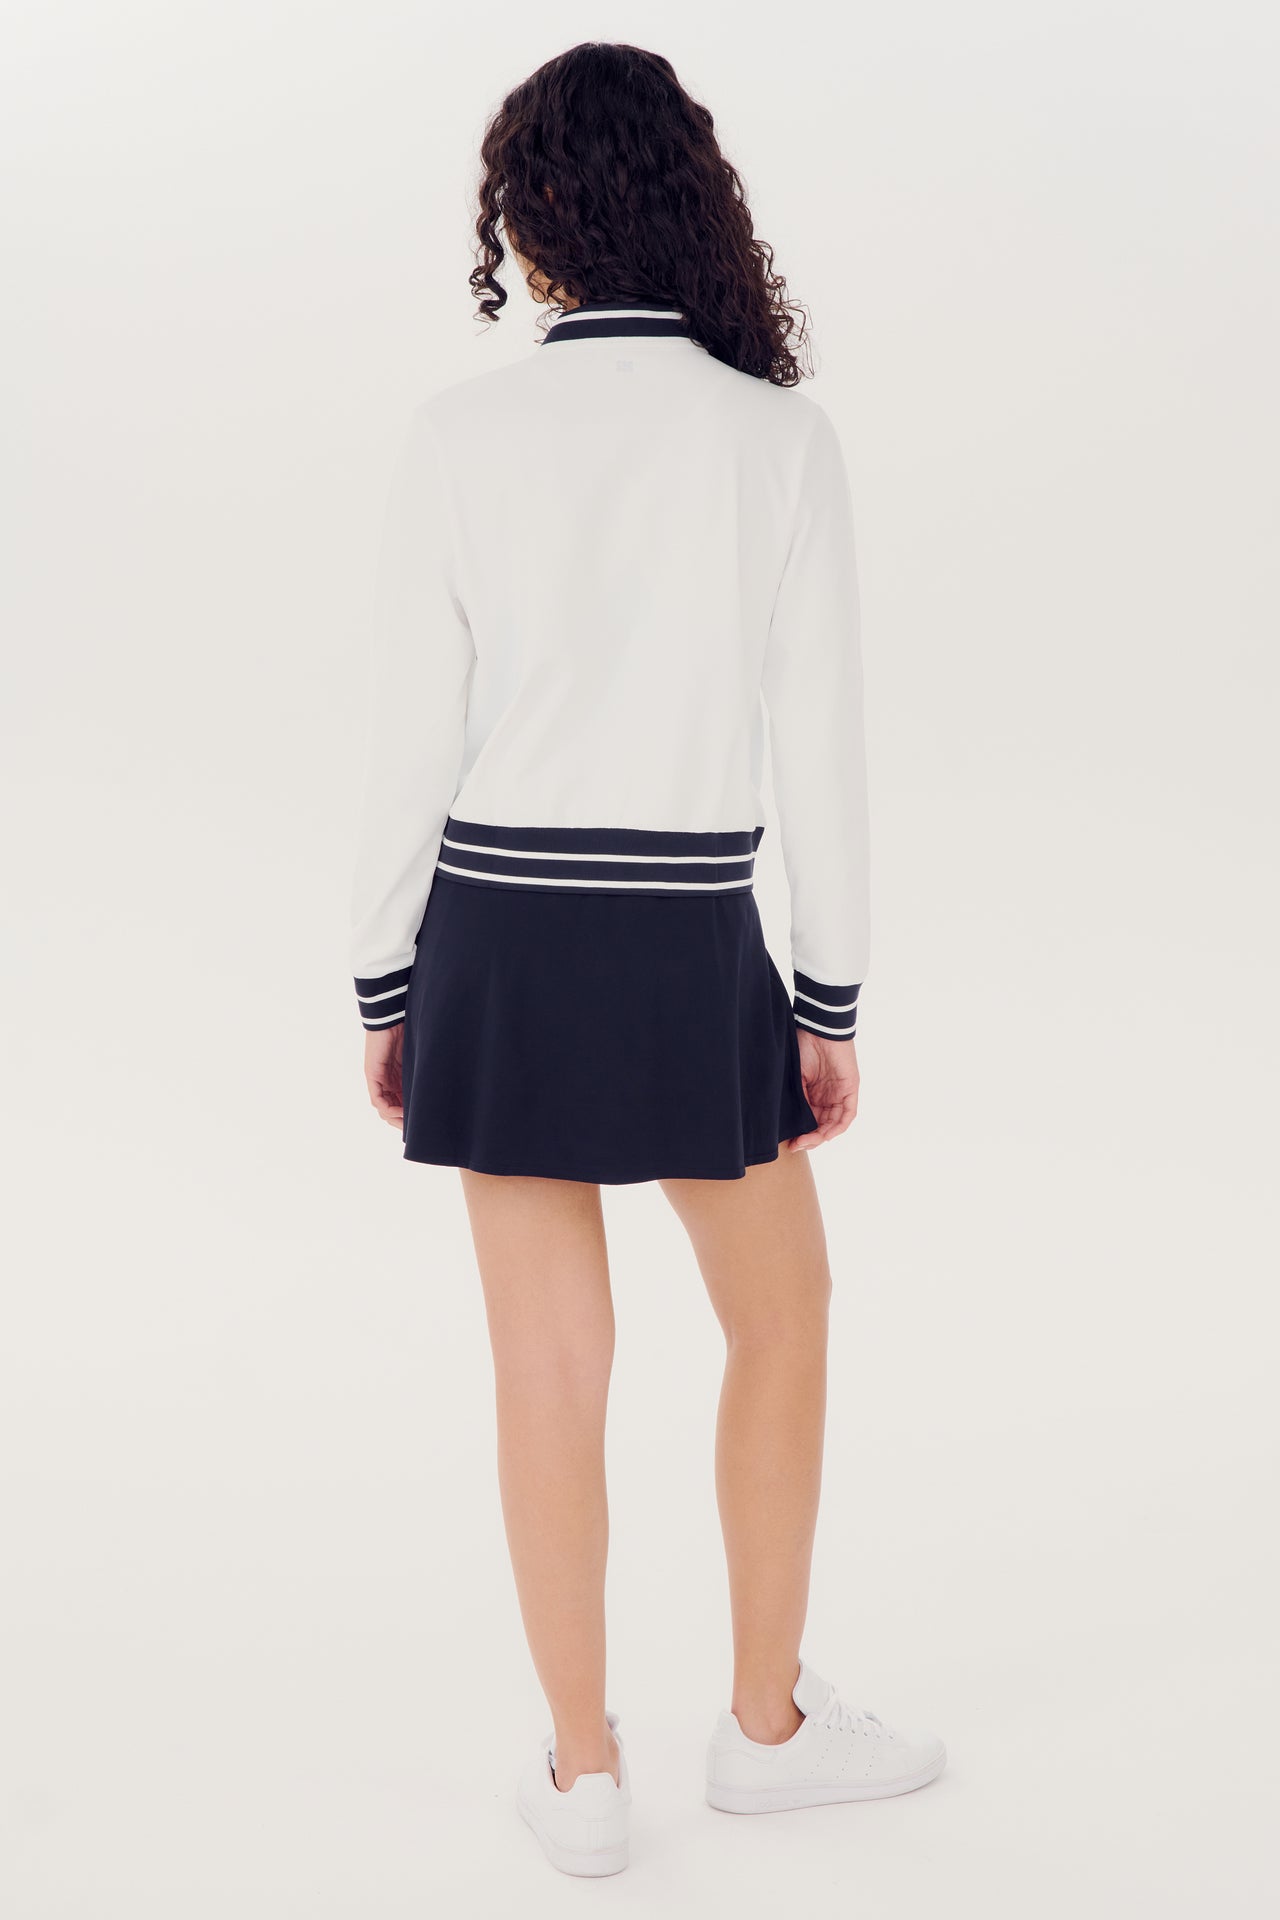 A person standing with their back to the camera wearing a SPLITS59 Ever Supplex Jacket in White with black trim and a navy skirt with white stripes, paired with white sneakers.